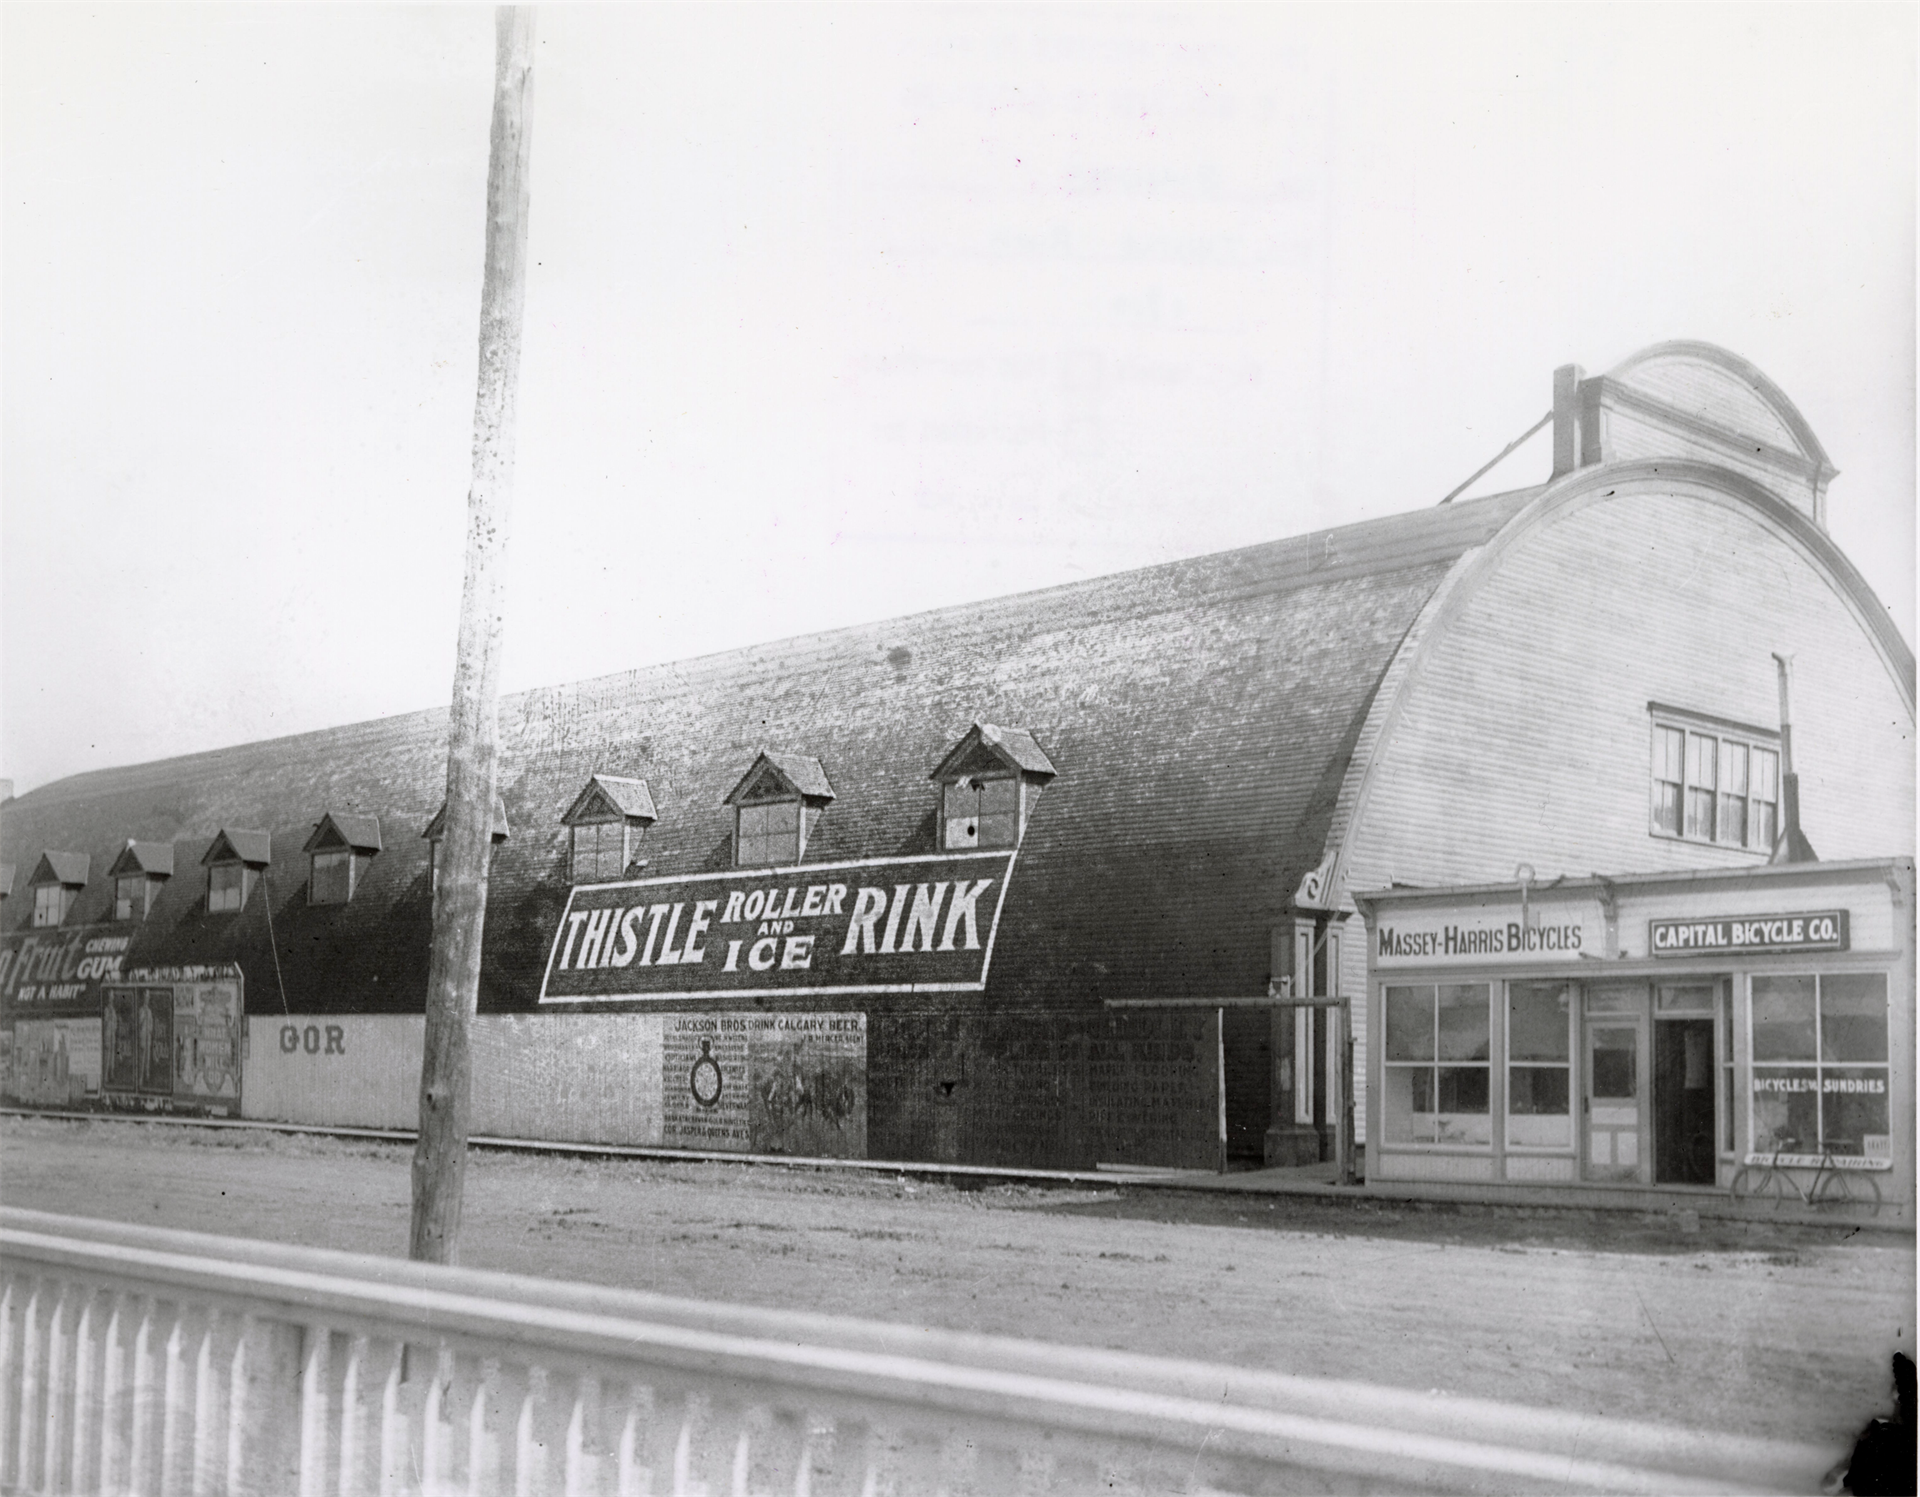 Thistle Roller and Ice Rink, 1910, City of Edmonton Archives, EA-9-391